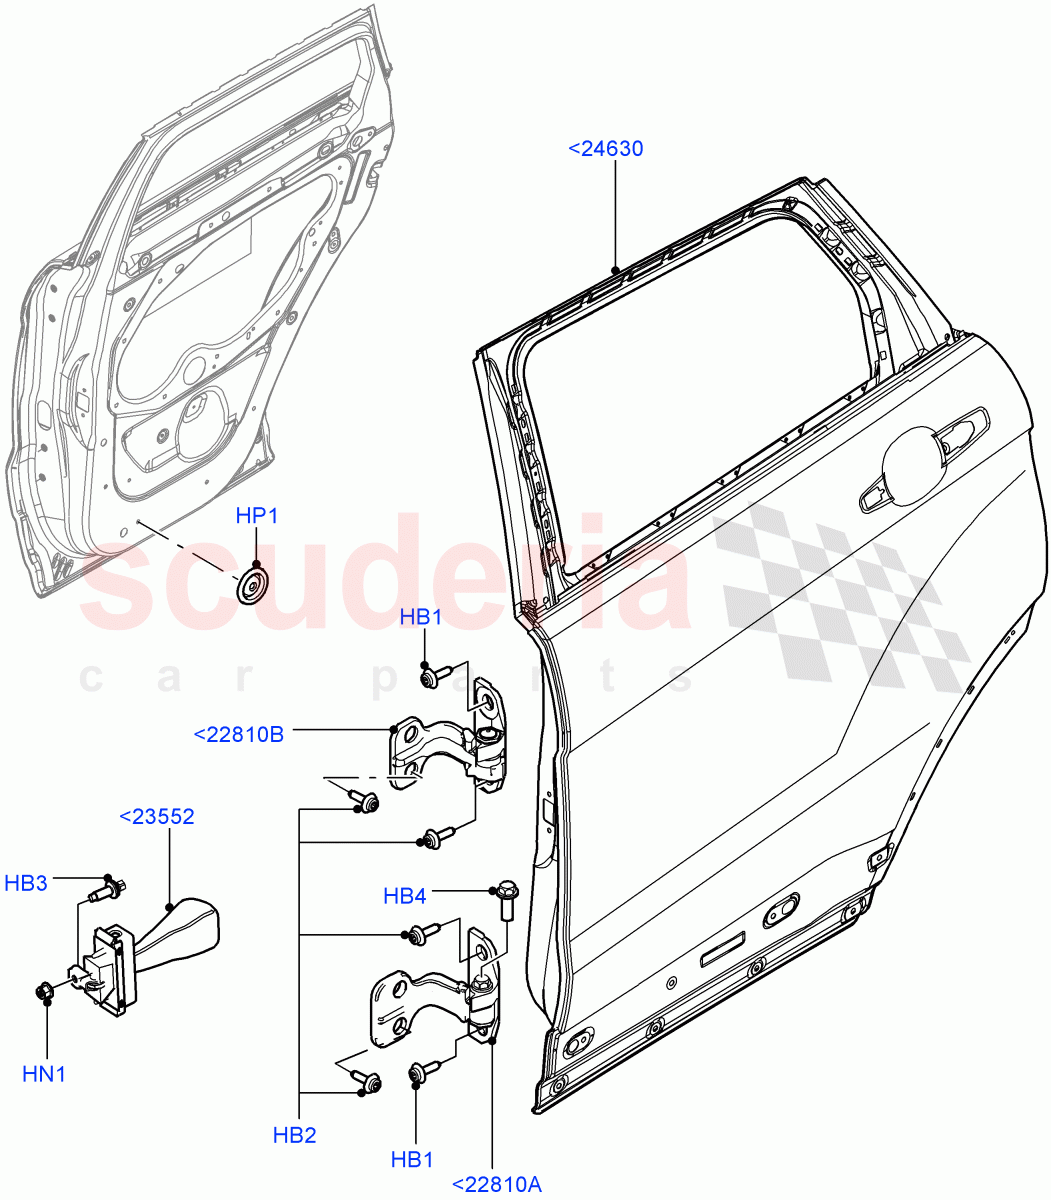 Rear Doors, Hinges & Weatherstrips(Door And Fixings)(Changsu (China))((V)FROMEG000001) of Land Rover Land Rover Range Rover Evoque (2012-2018) [2.0 Turbo Petrol GTDI]